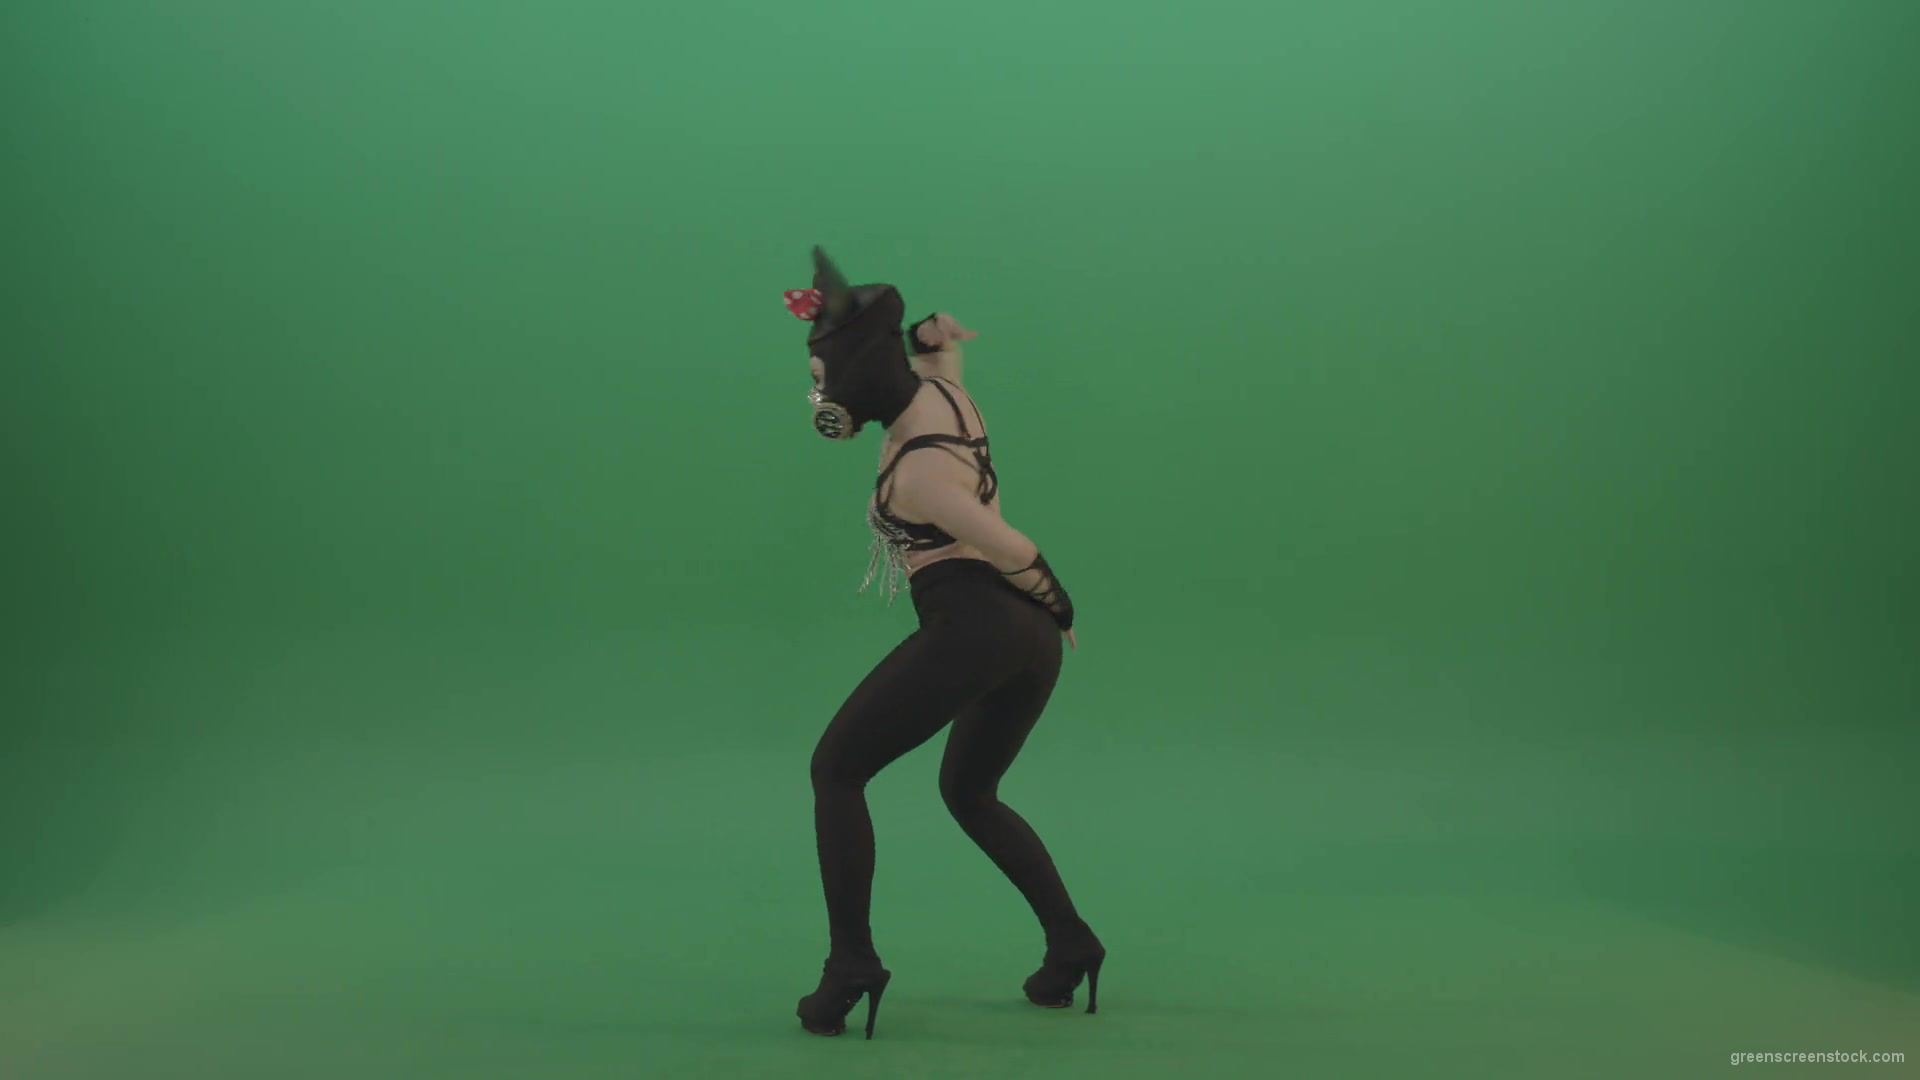 Girl-quickly-dances-in-the-style-of-Mickey-Mouse-on-the-sides-of-a-sexy-costume-on-green-screen-1920_007 Green Screen Stock